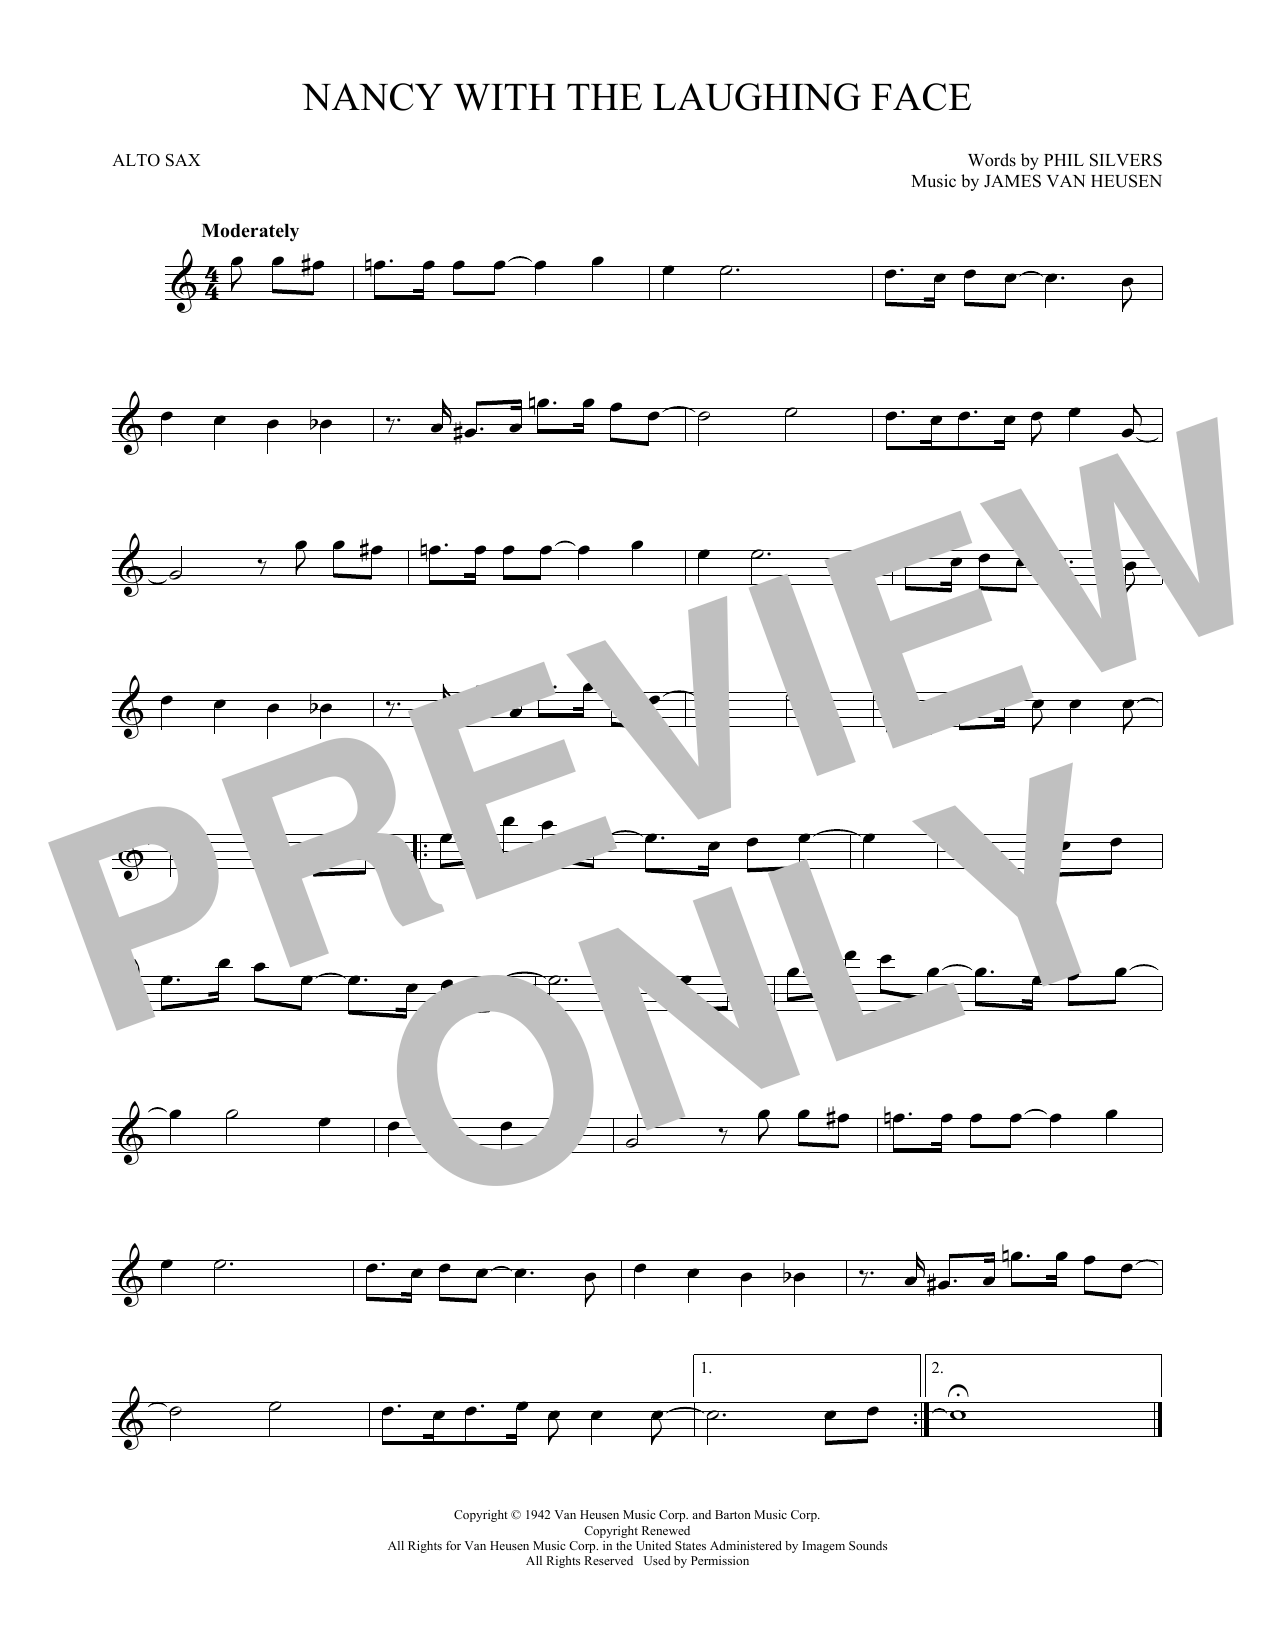 Frank Sinatra Nancy With The Laughing Face sheet music notes printable PDF score